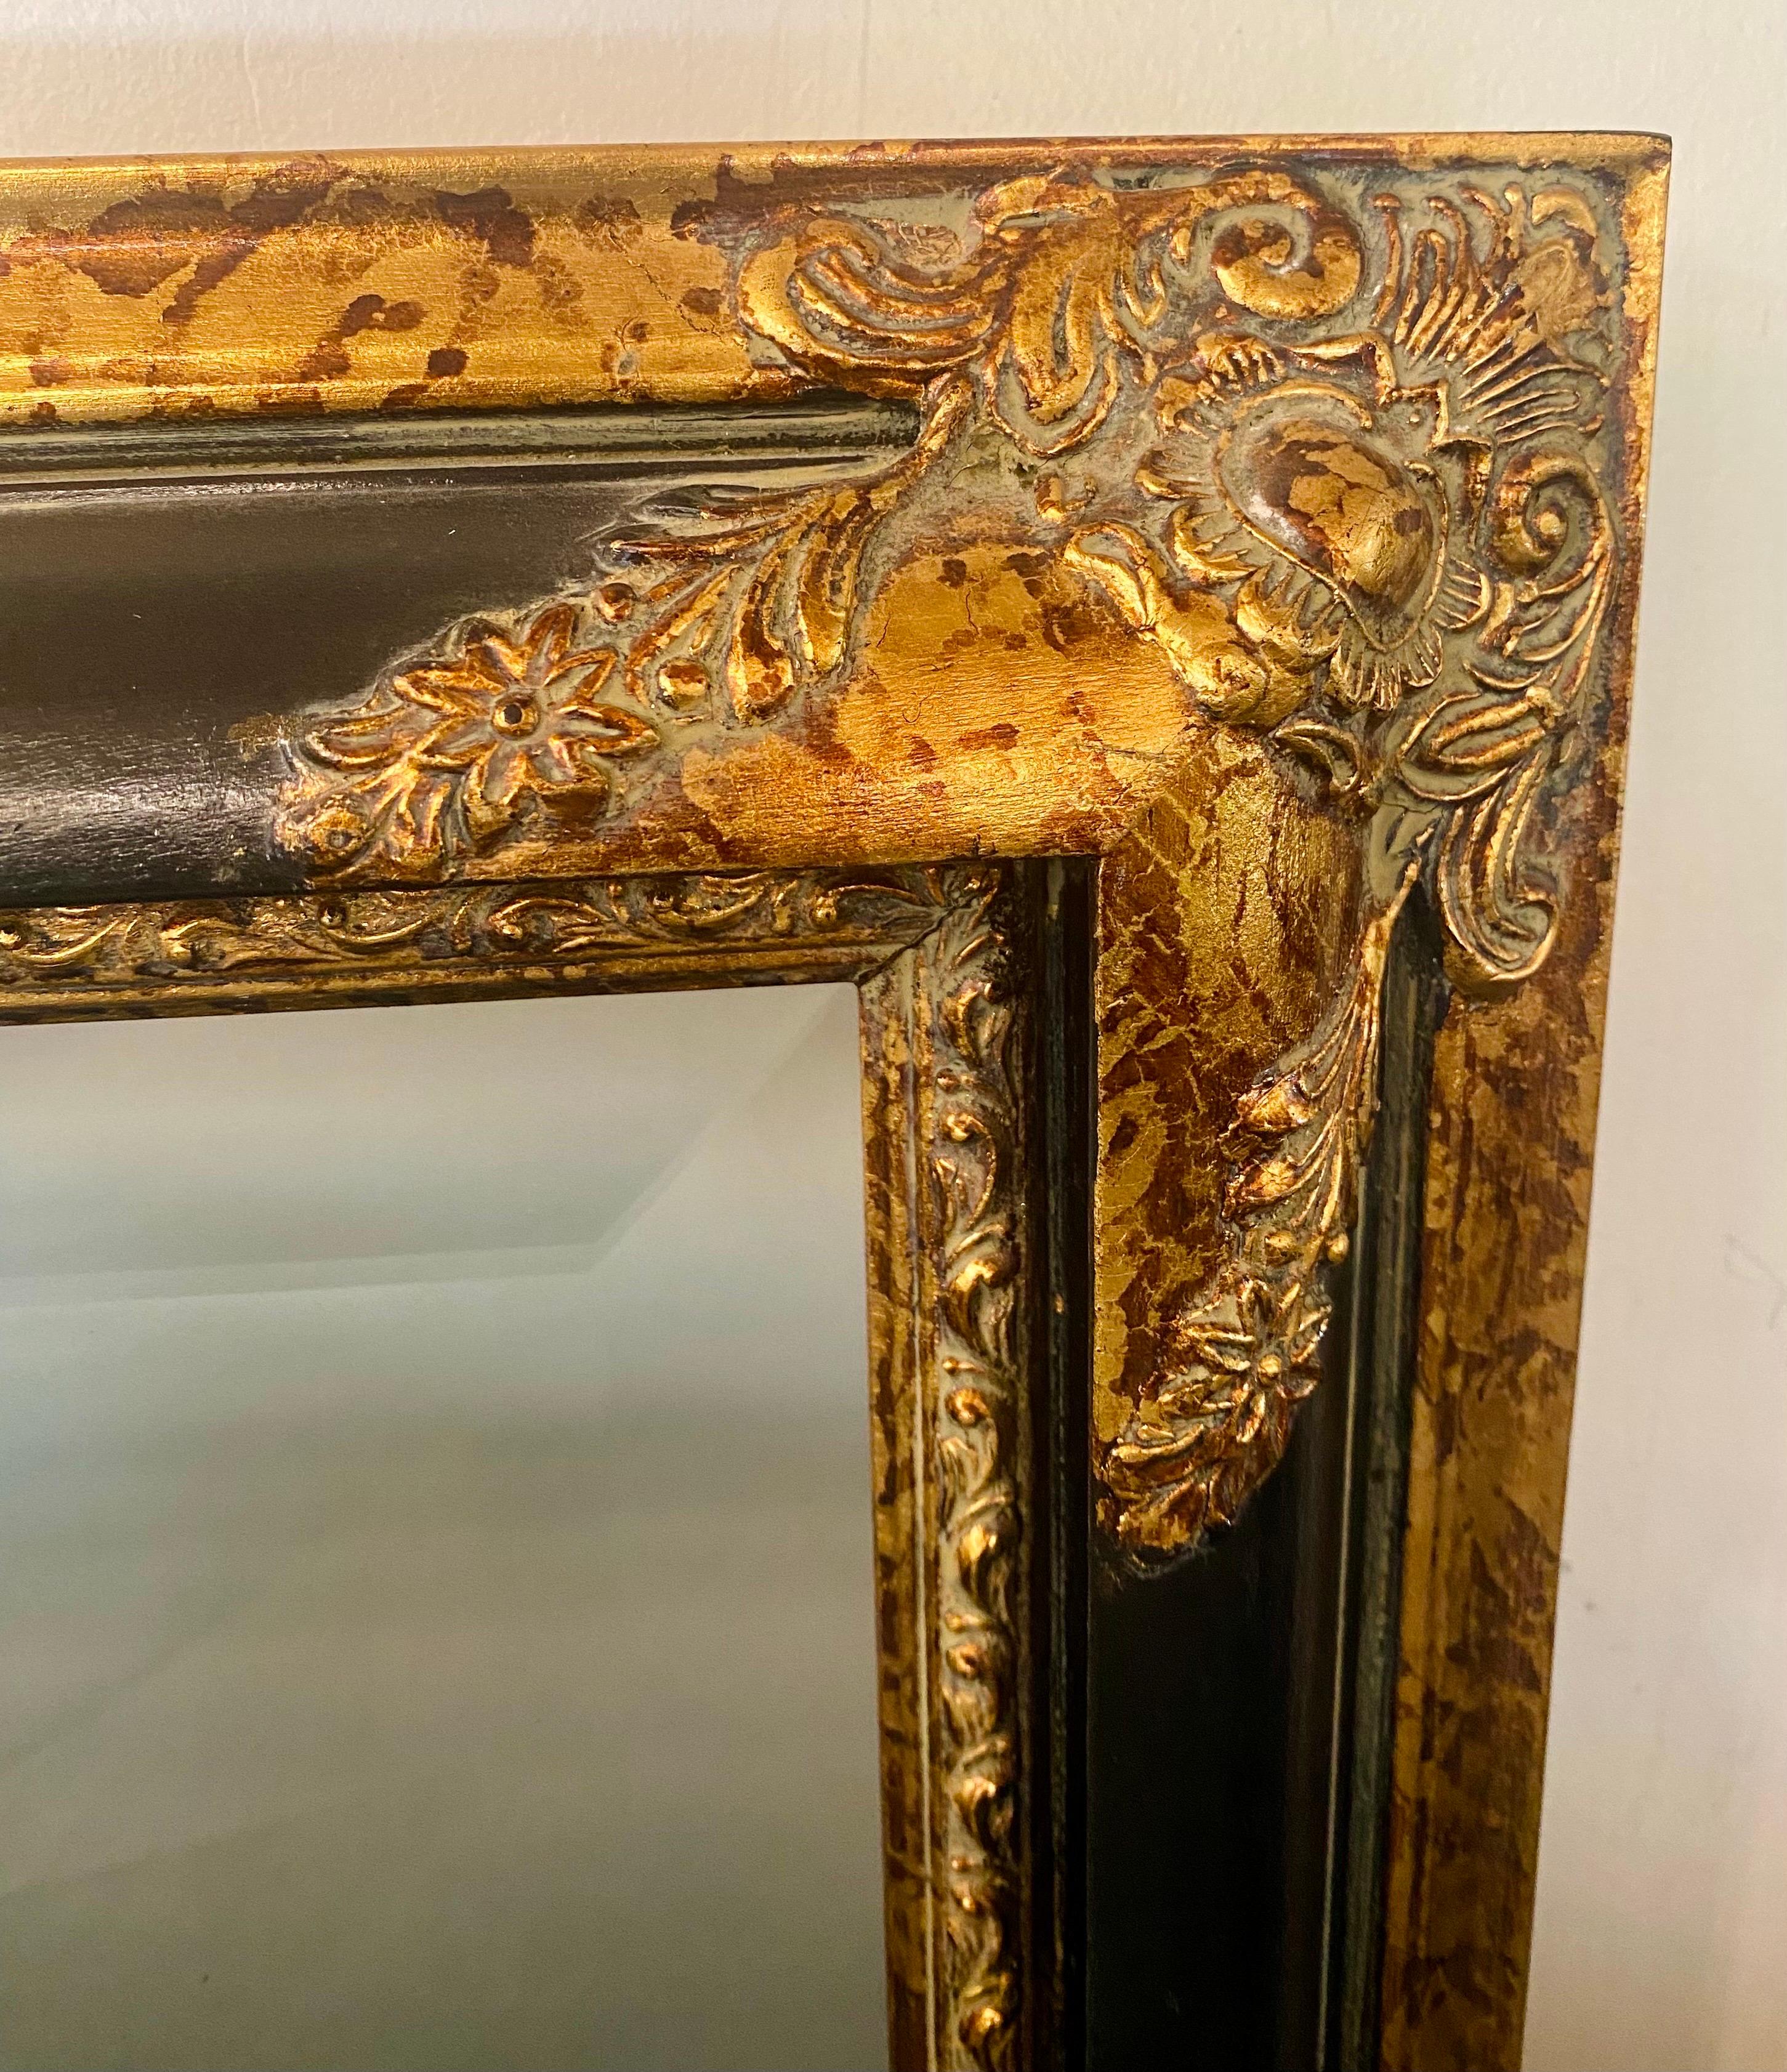 20th Century Baroque Style Ebony Wall Mirror with Tortoise & Gilt Design Frame For Sale